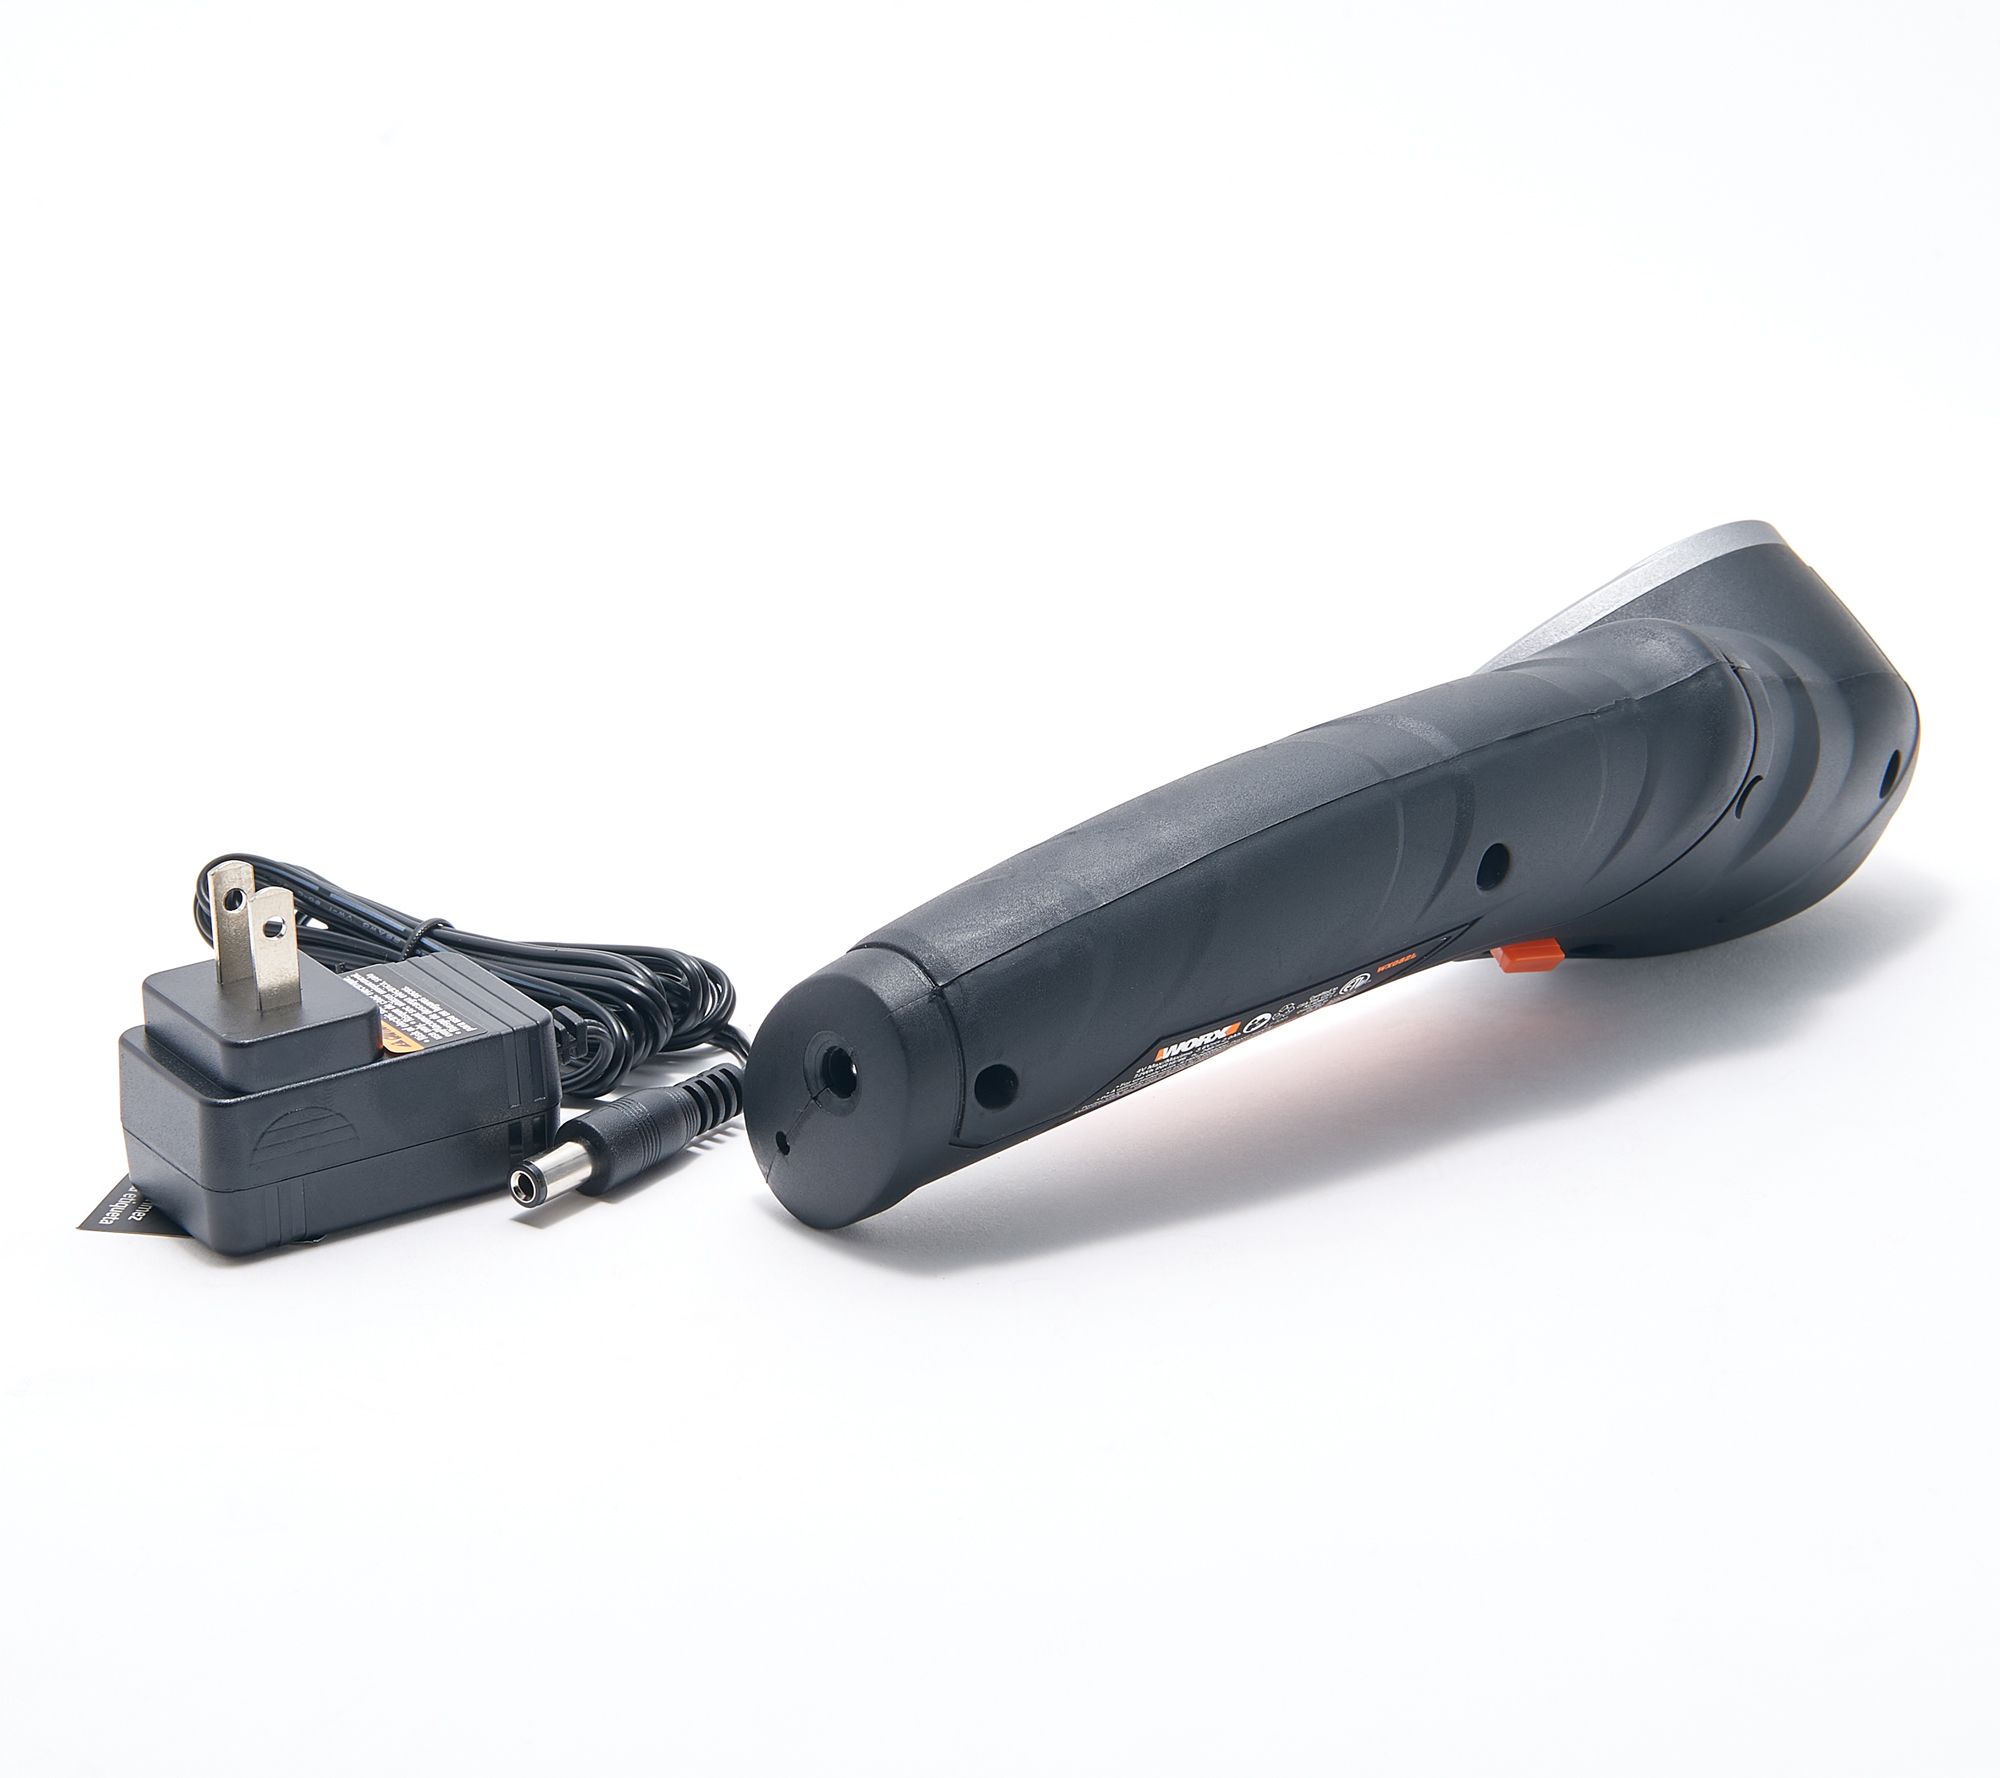 Worx Zip Snip Electric Scissors/Box Cutter Review! A Recycling